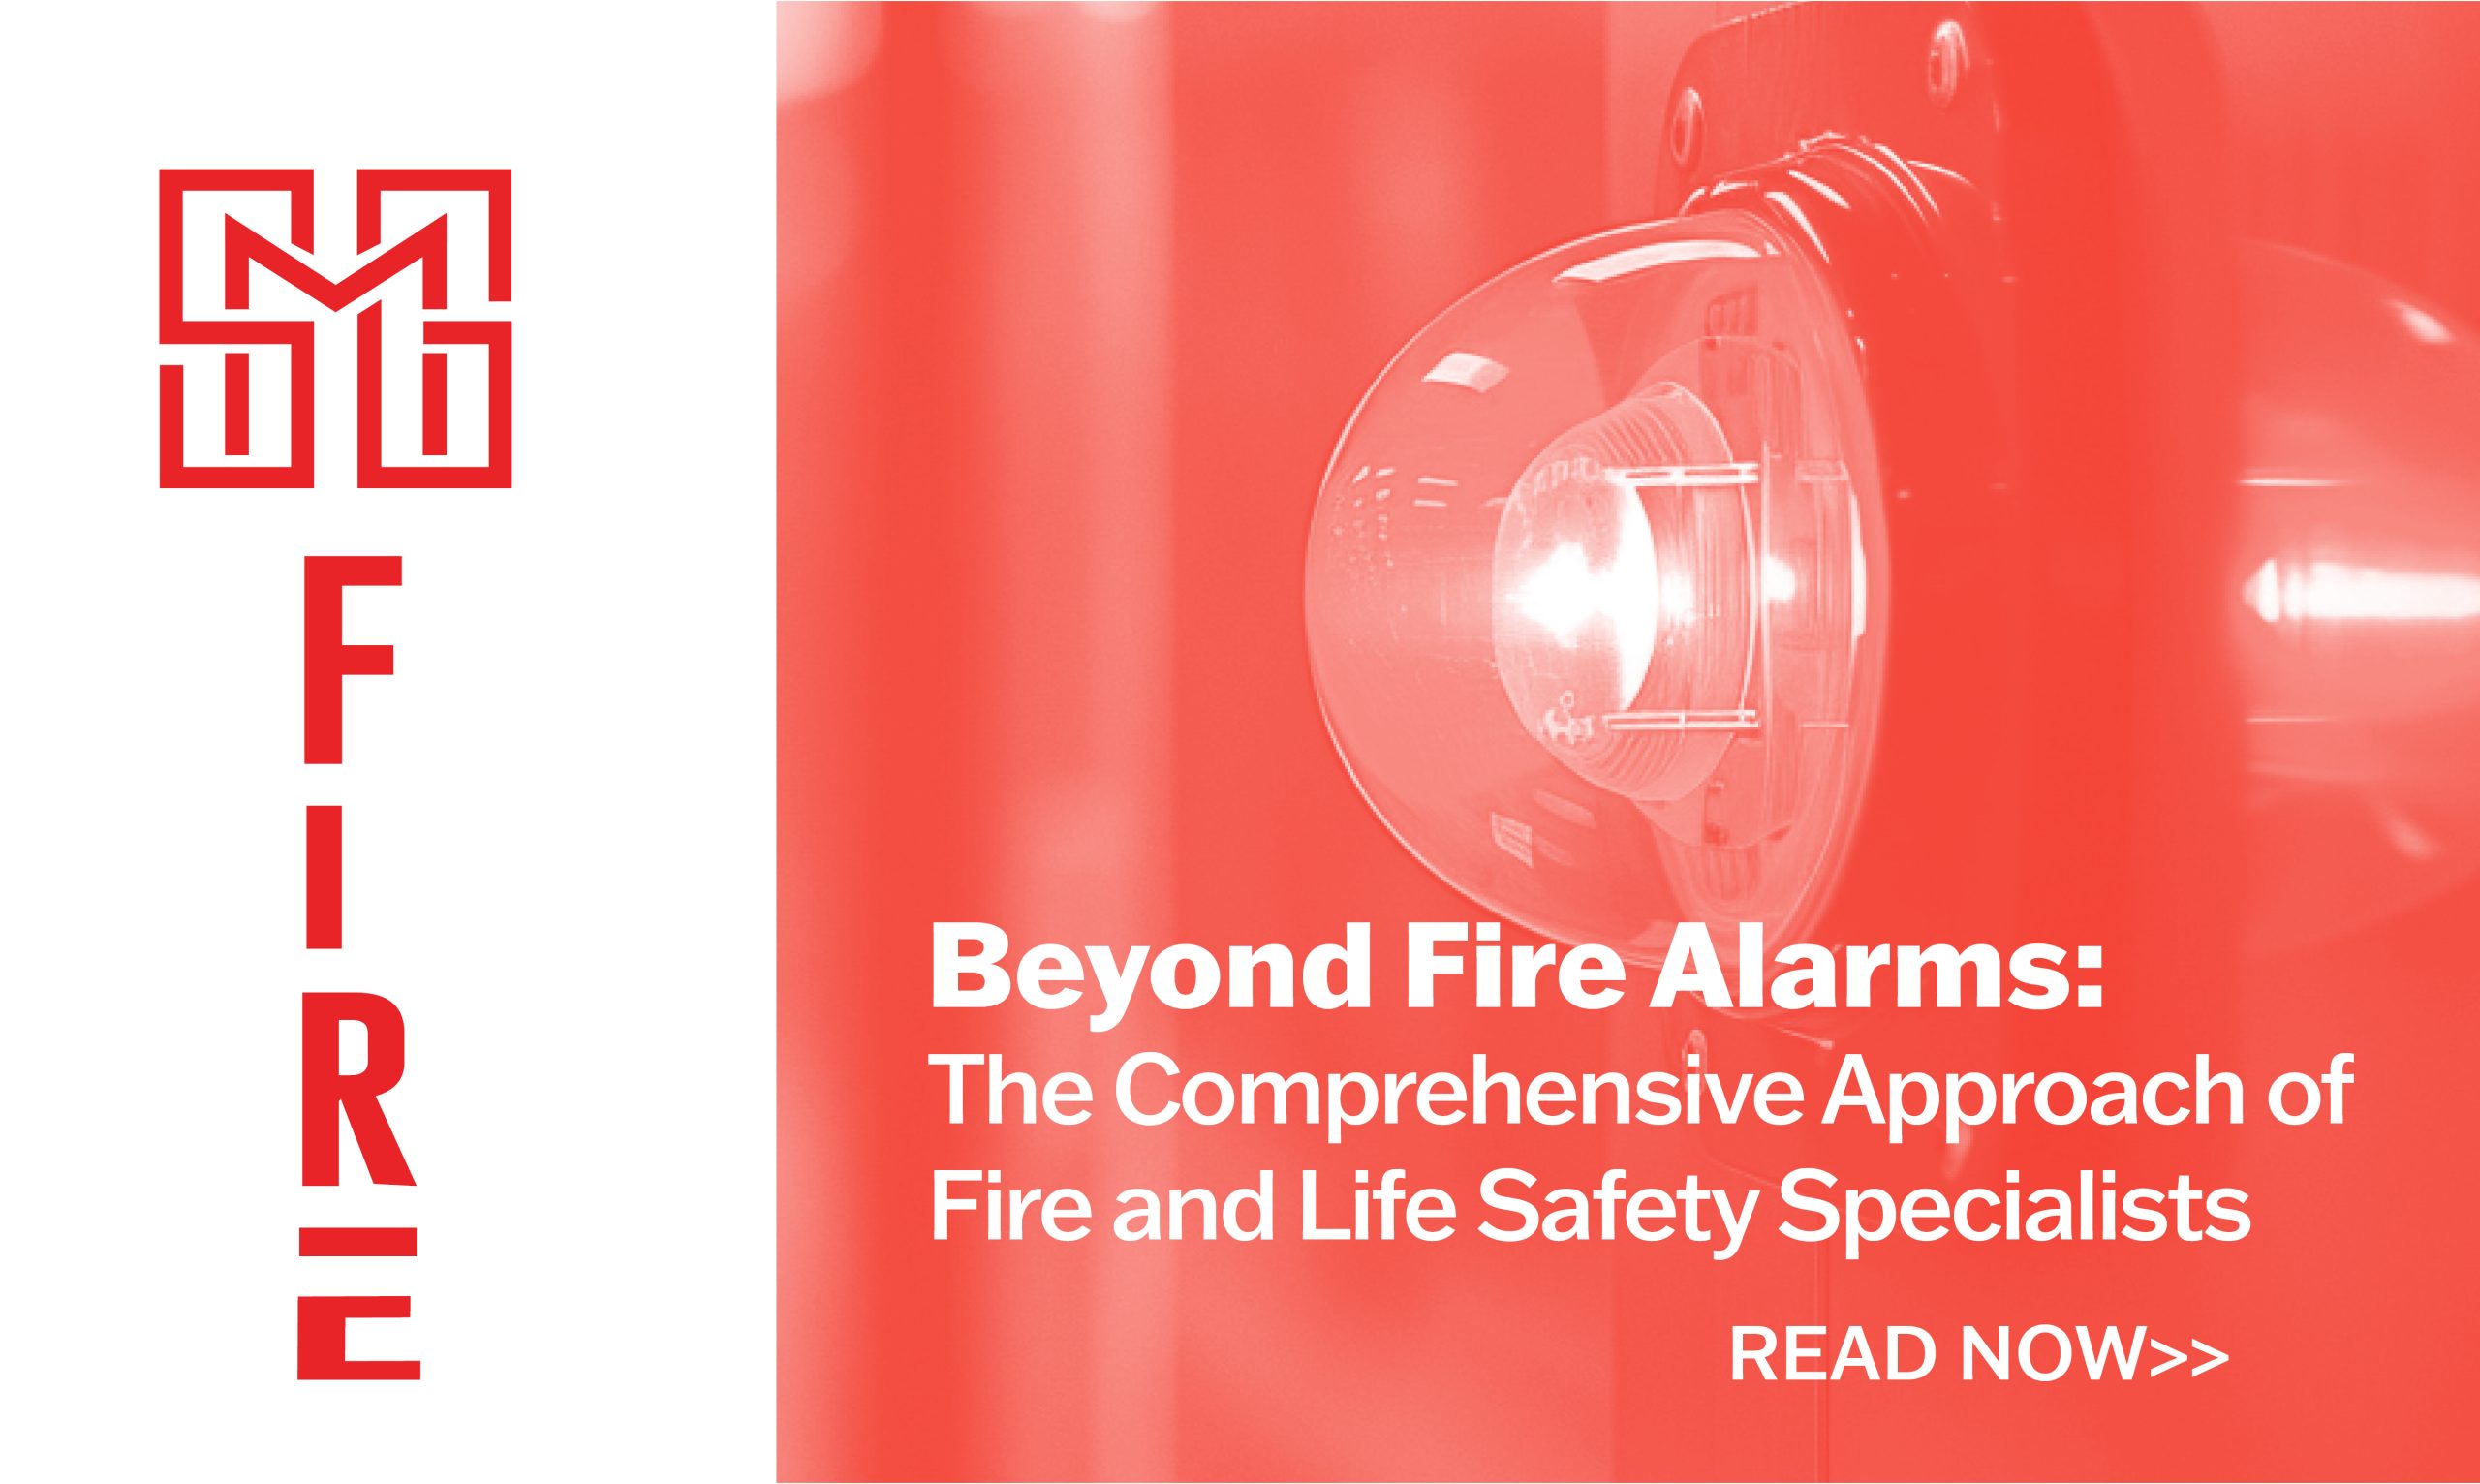 Beyond Fire Alarms: The Comprehensive Approach of Fire and Life Safety Specialists